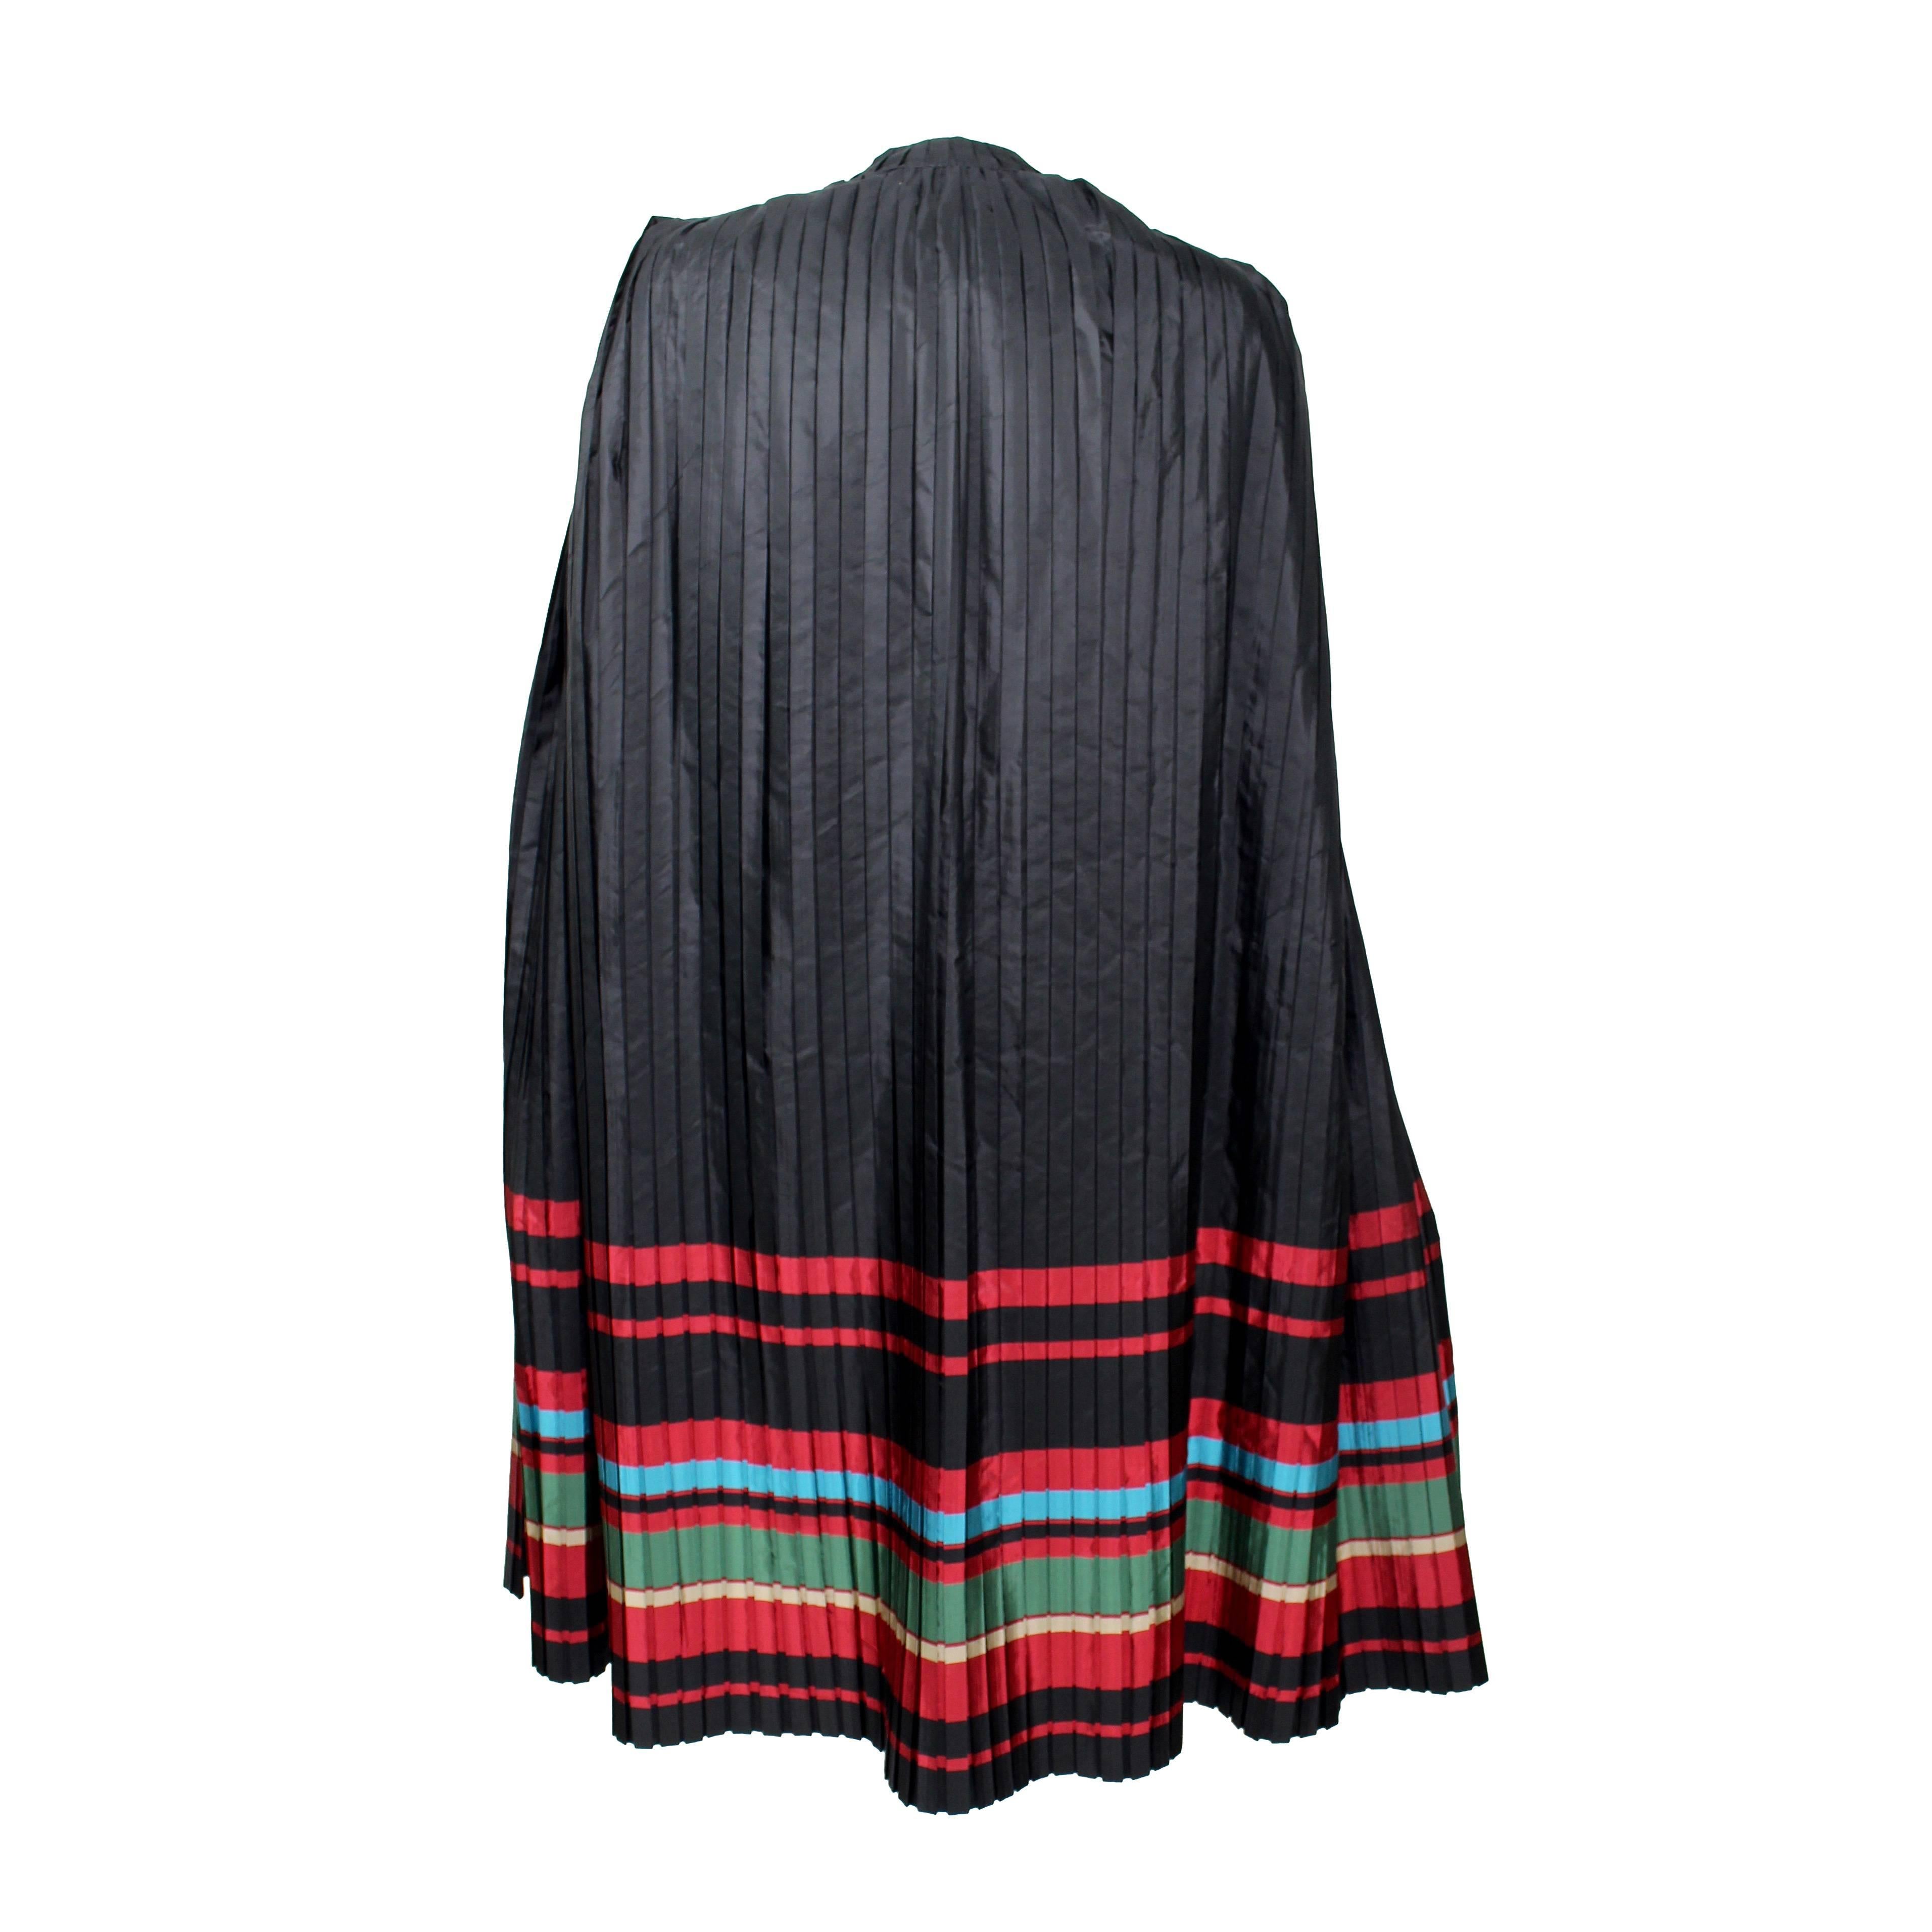 A Fabulous pleated silk cape  from Christian Dior with  a single crystal button closure  at the neck. A vivid display of stripes in red, green gold and blue at the bottom portion. 

Excellent Condition.
Measurements:
cape shoulders measure